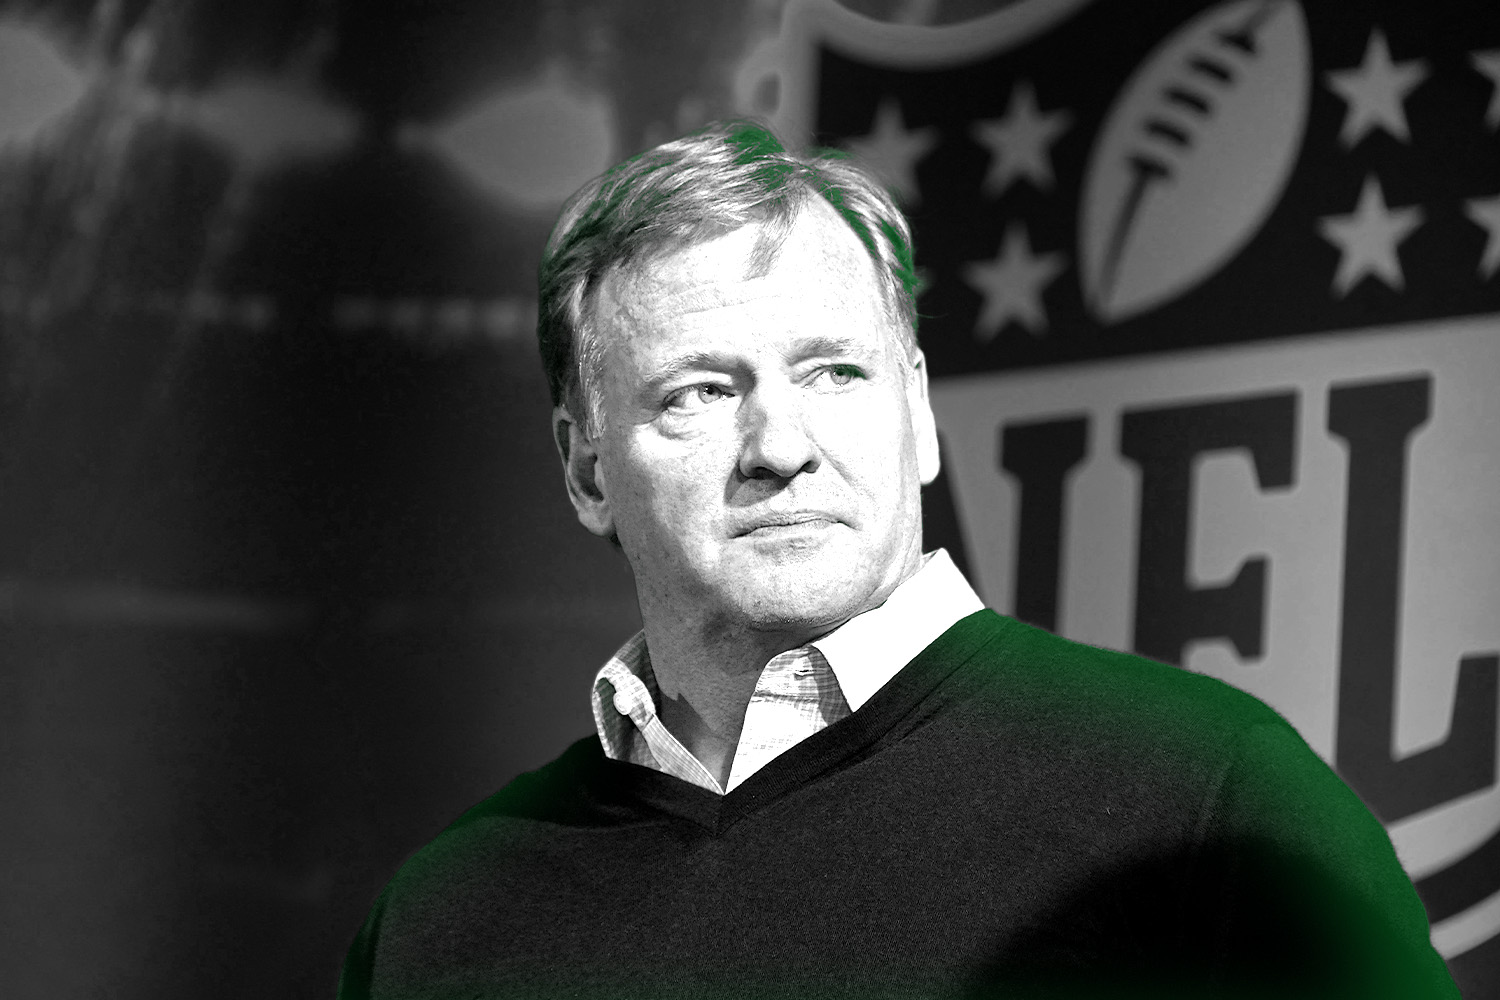 NFL Taking Time to Find Right Investor Mix on Media Properties